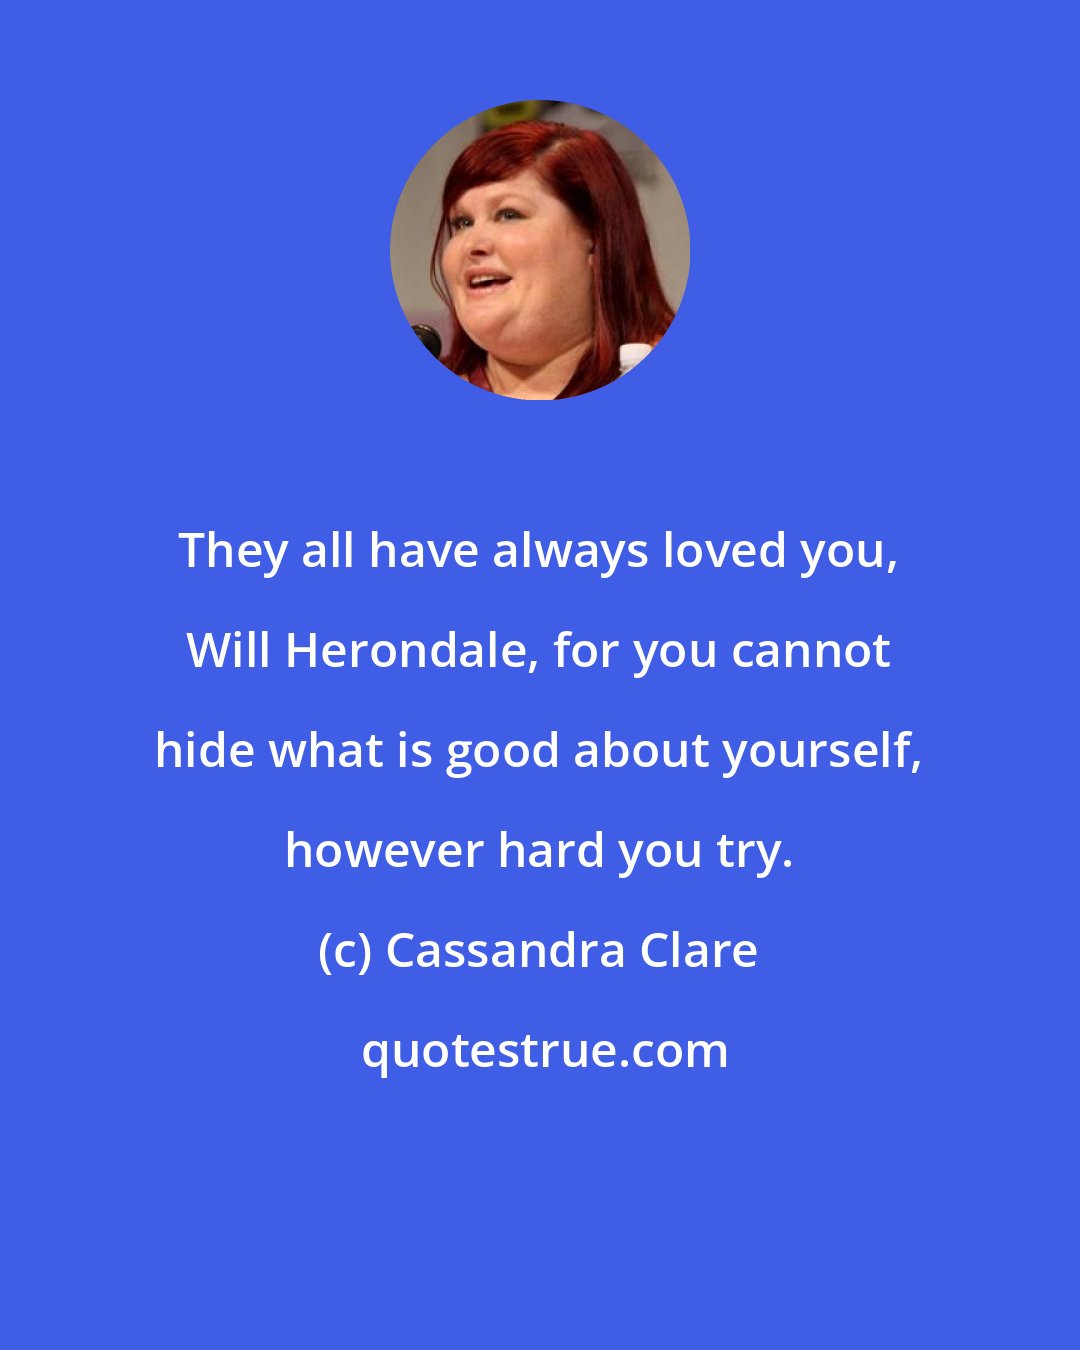 Cassandra Clare: They all have always loved you, Will Herondale, for you cannot hide what is good about yourself, however hard you try.